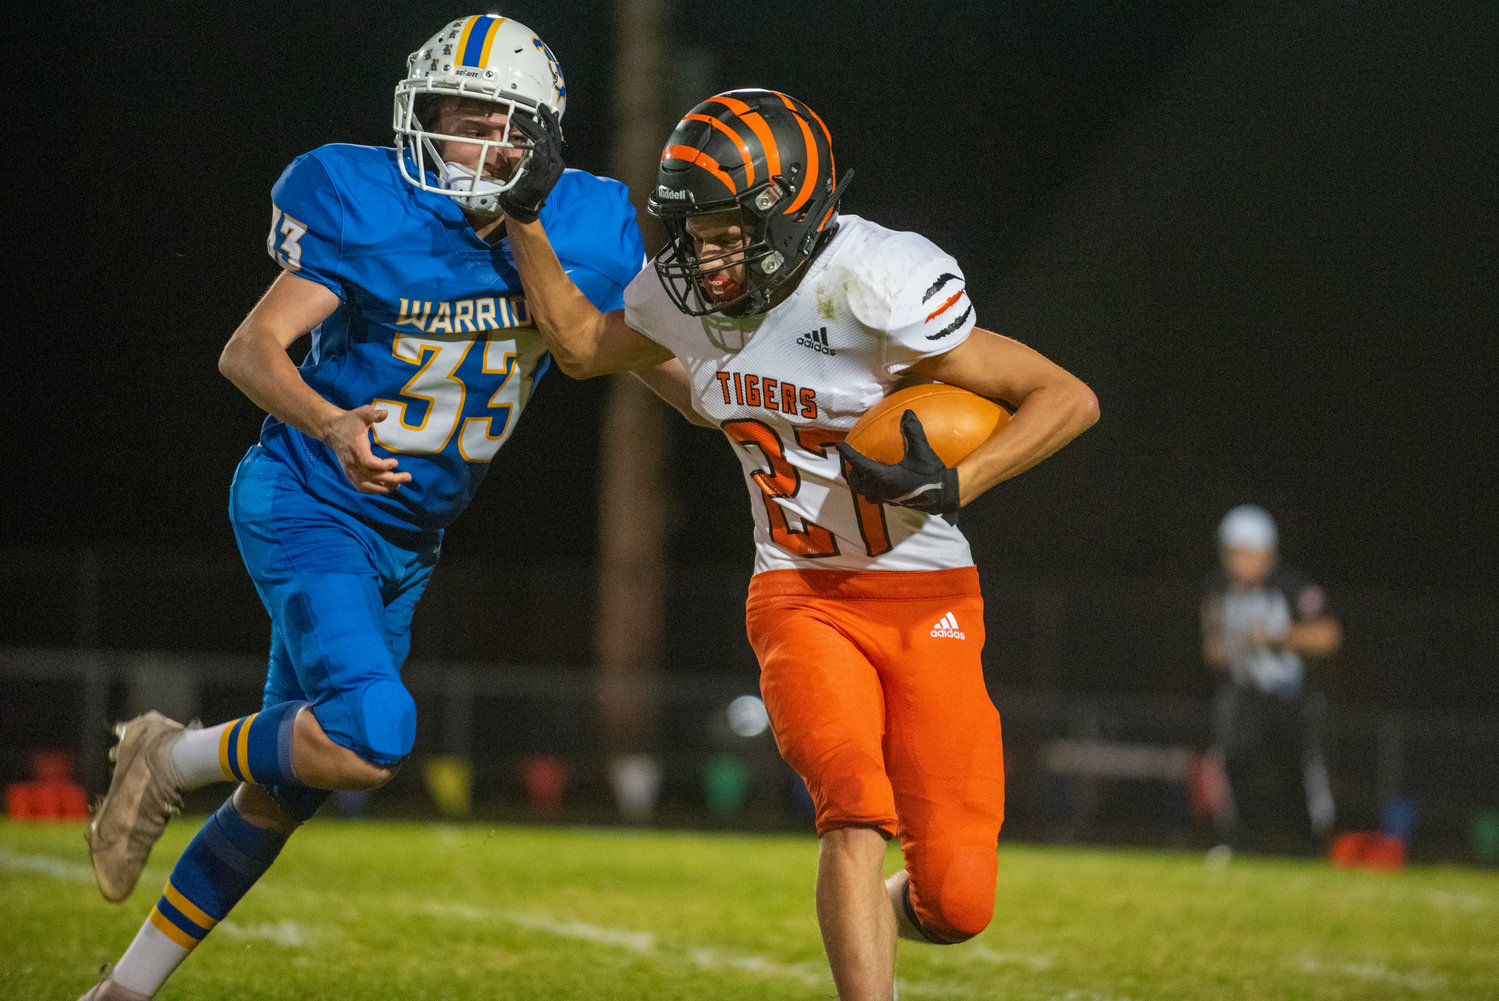 Centralia’s Anthony Saucedo (27) stiff-arms Rochester’s Tristan Nelson (33) on Oct. 2, 2021.